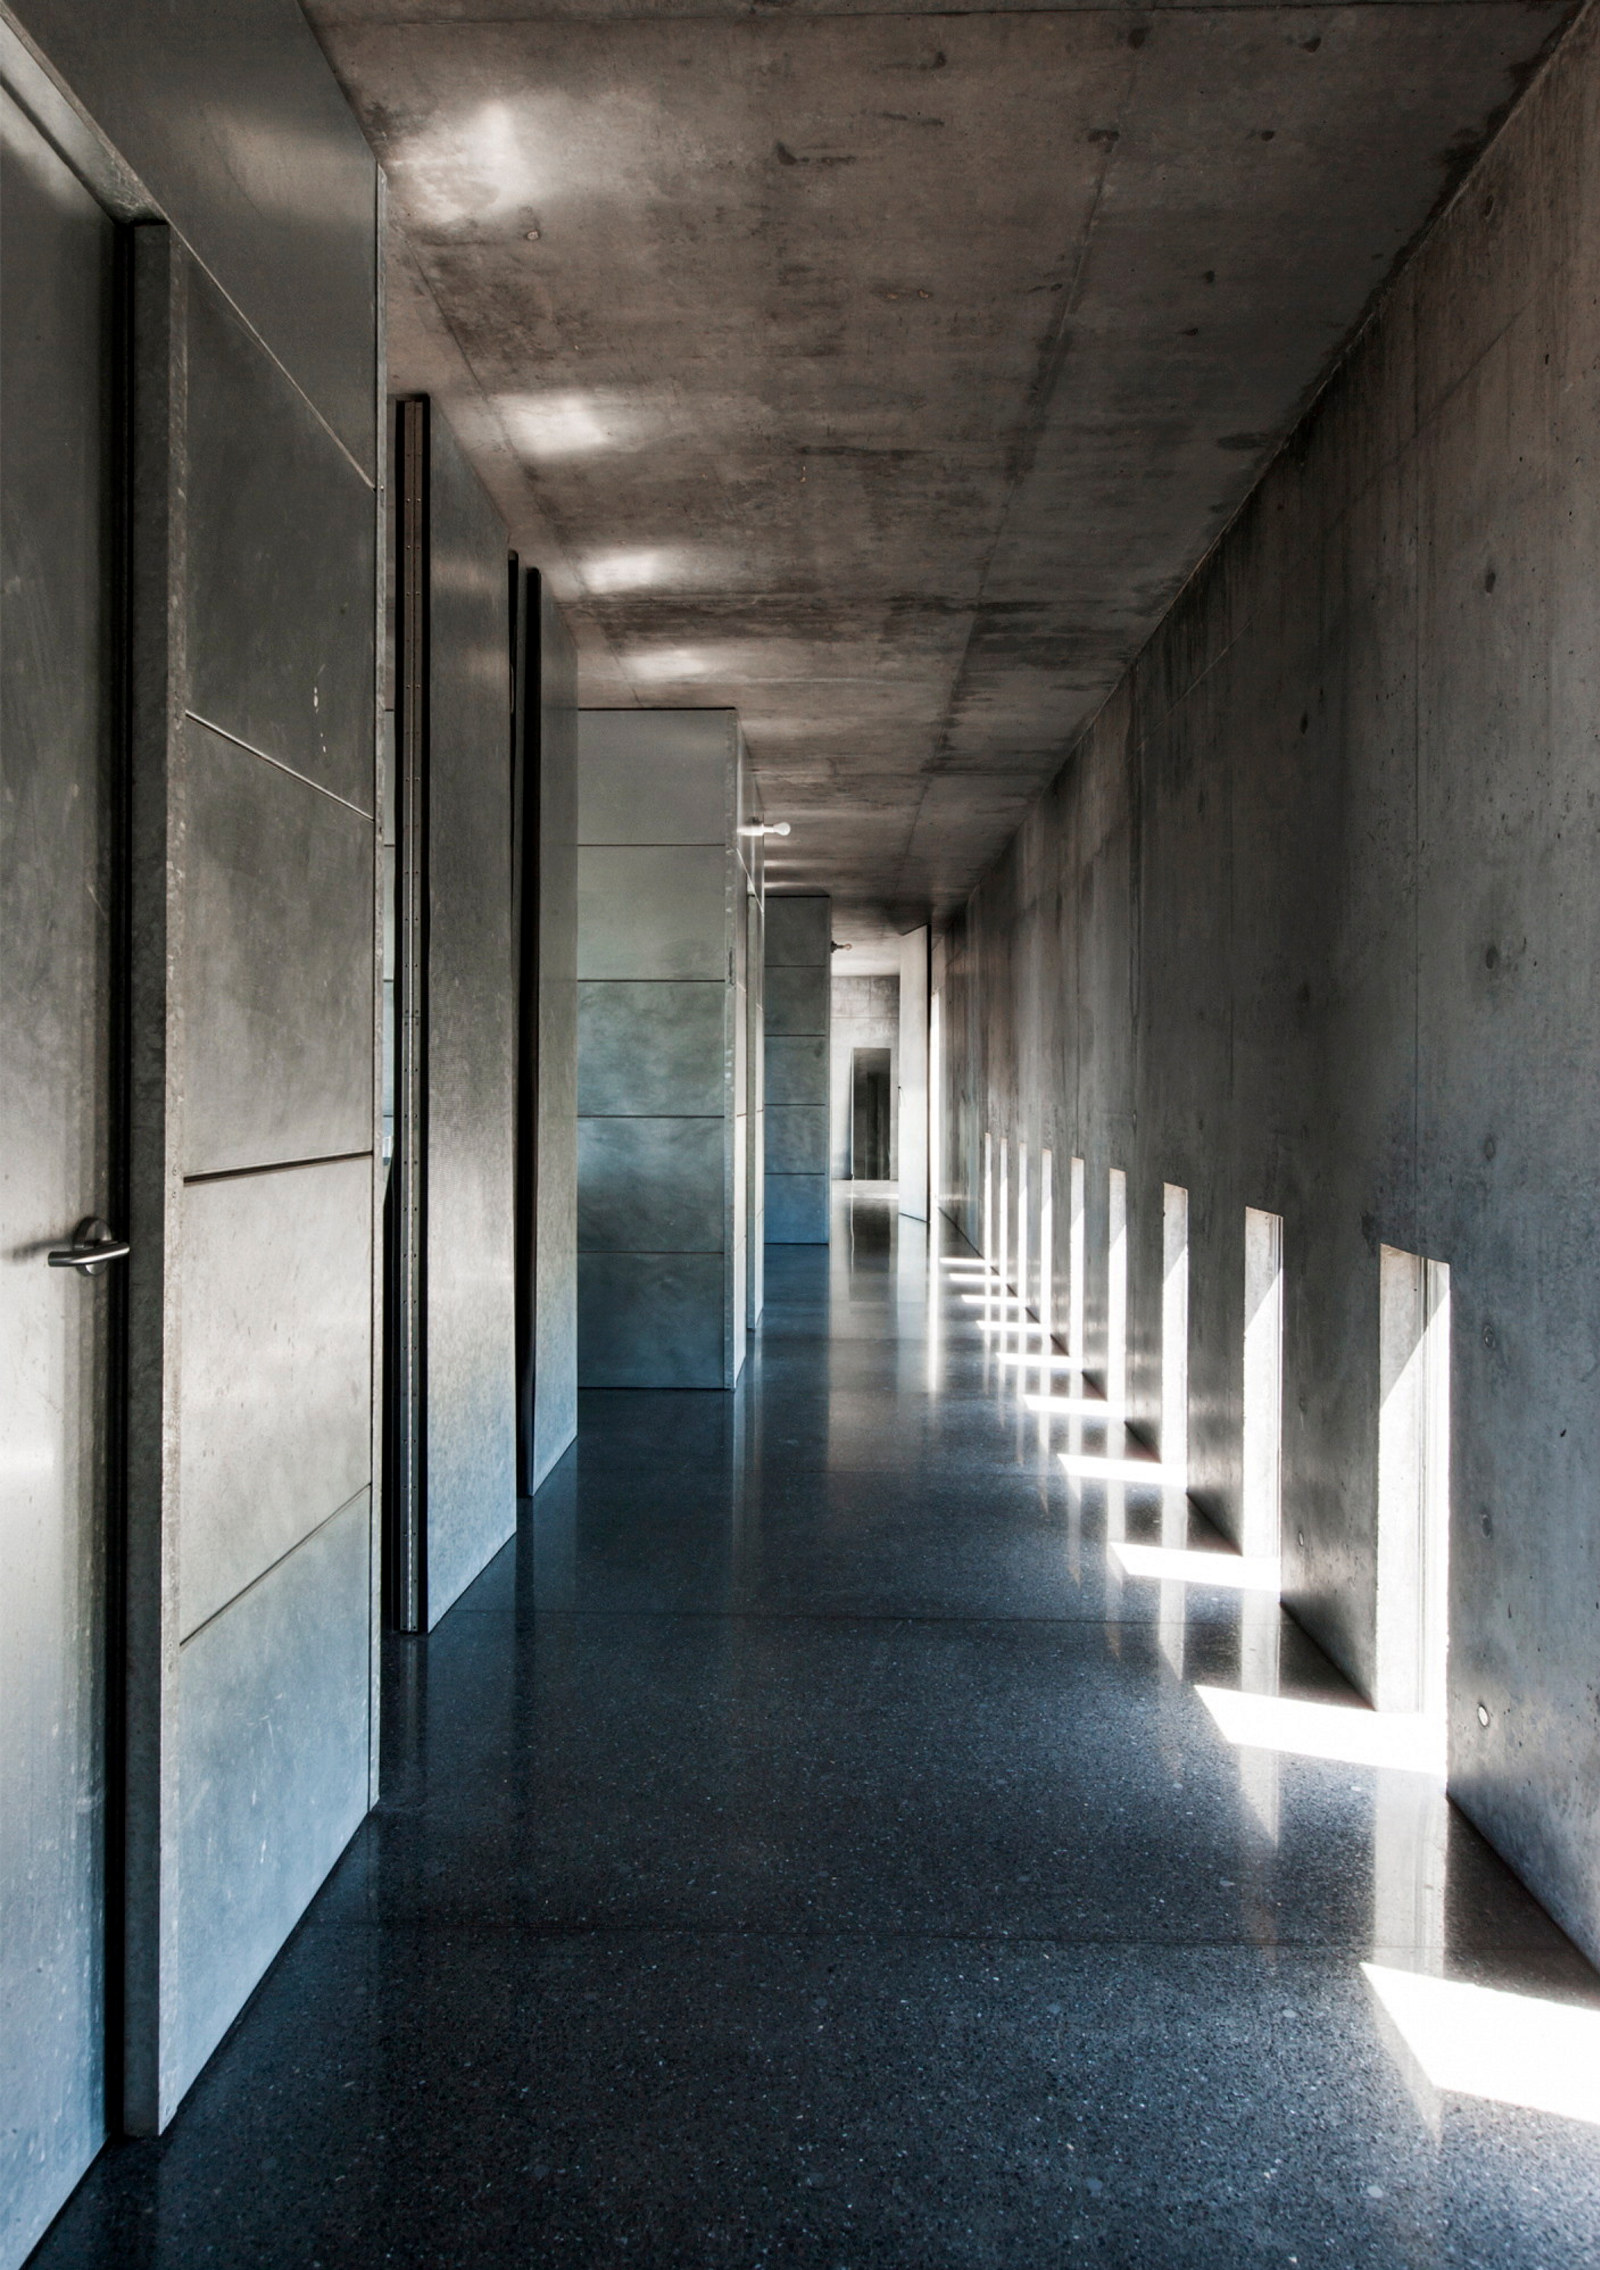 This is a colour photograph of a concrete corridor and polished floor with shafts of light entering through small low windows running the length of the corridor